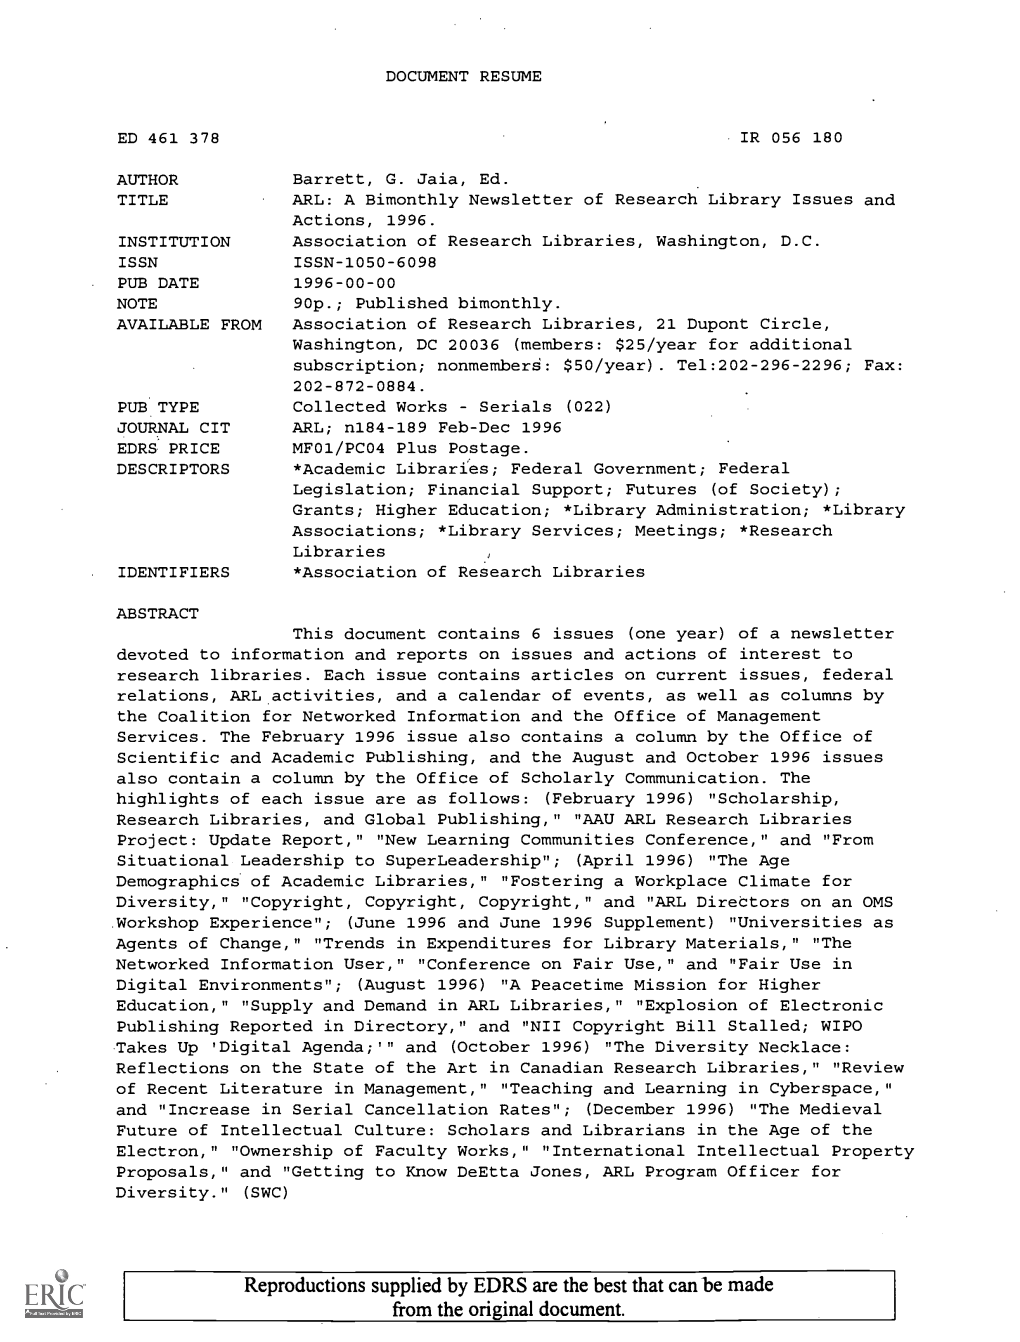 ARL: a Bimonthly Newsletter of Research Library Issues and Actions, 1996